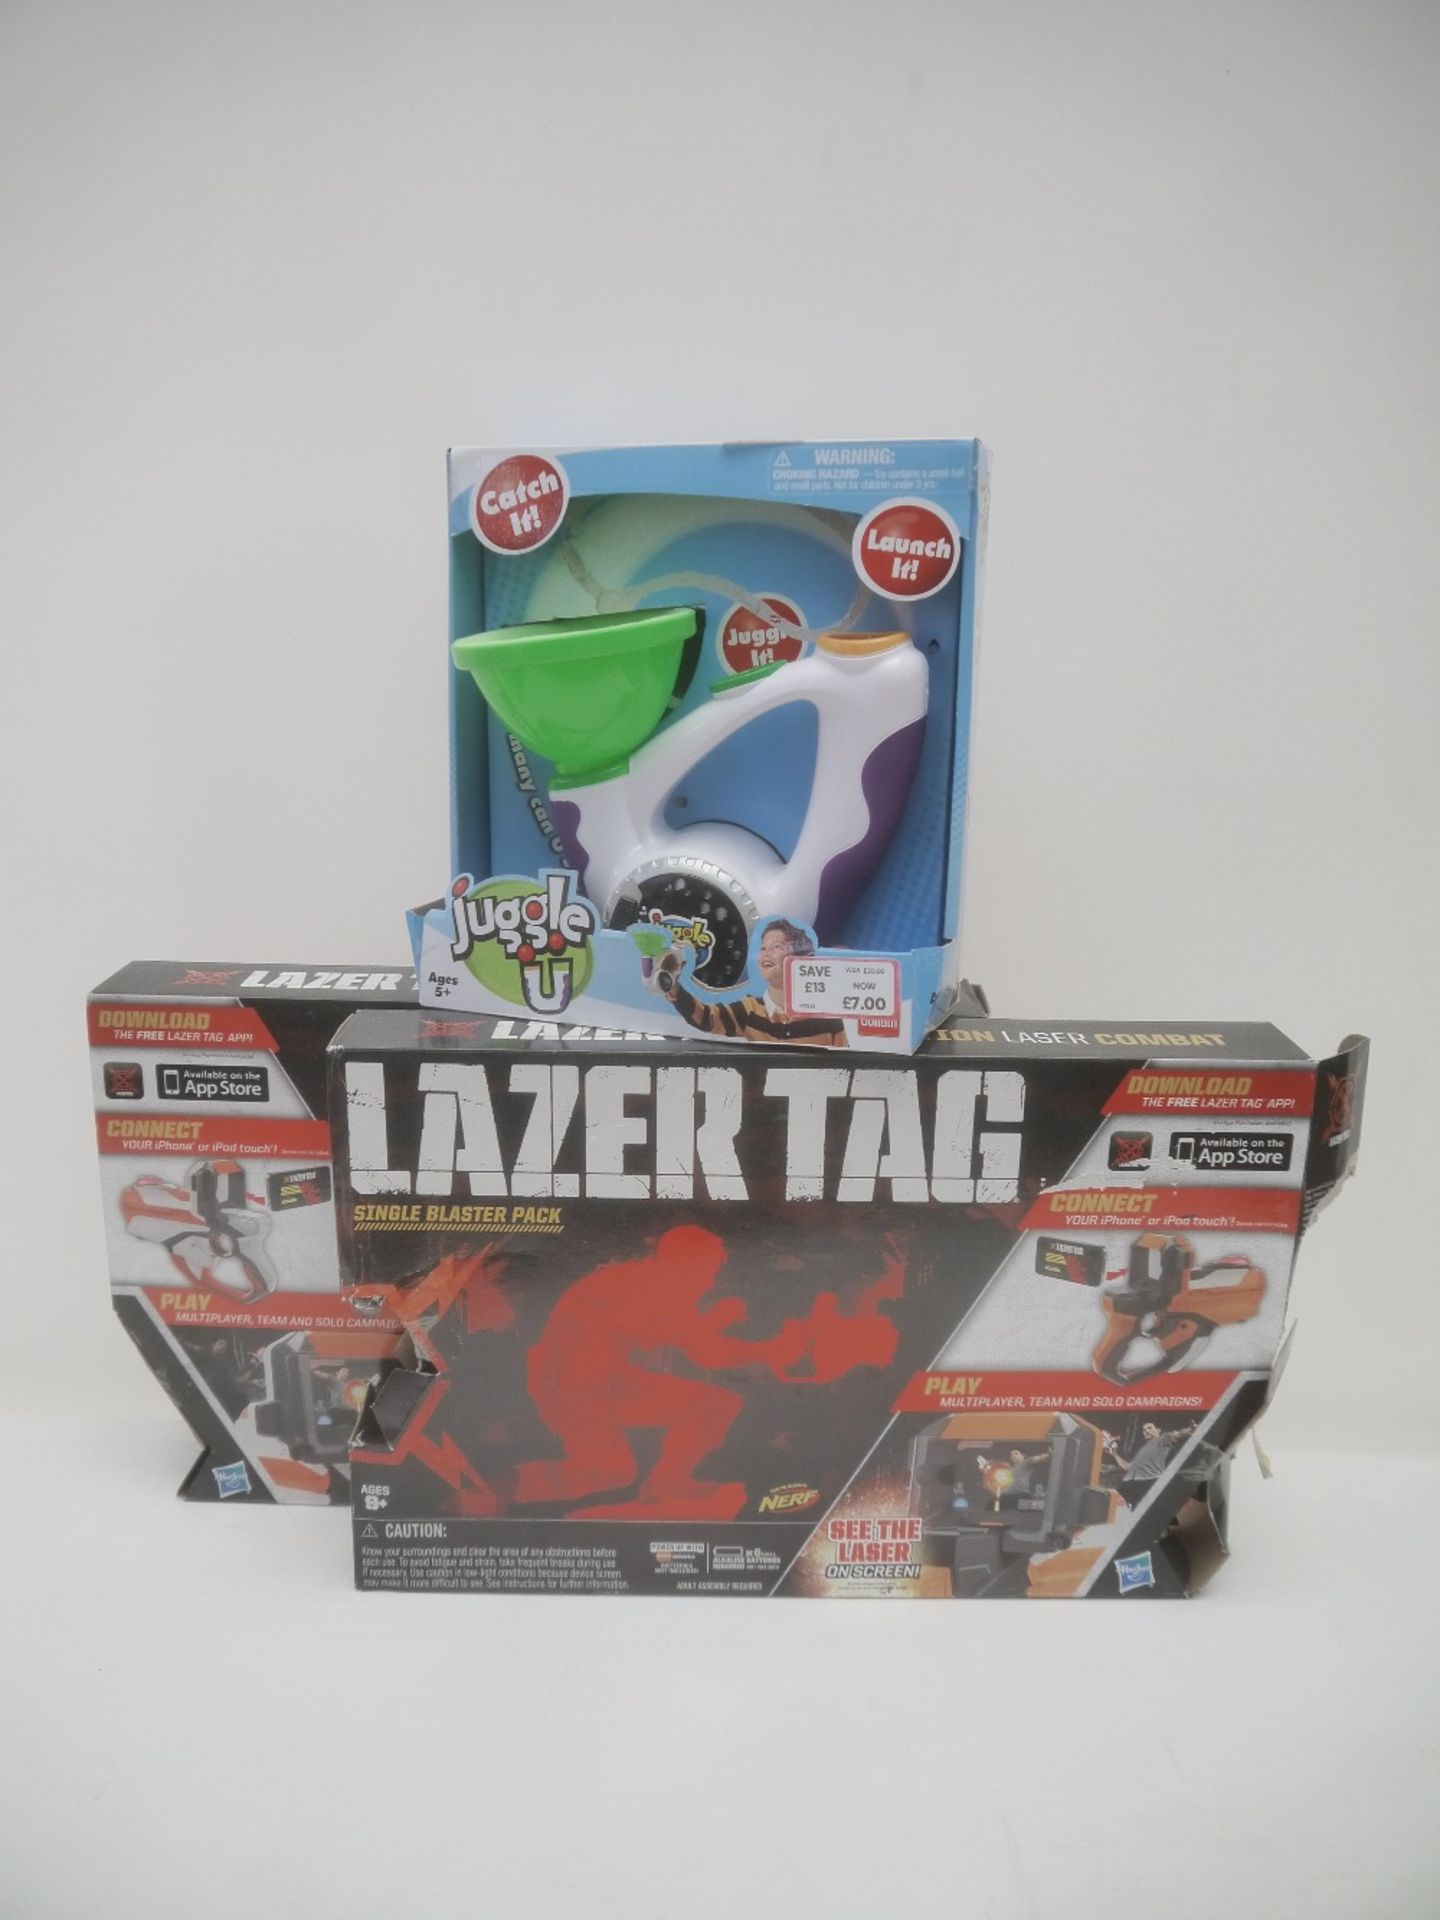 3x Toys in this lot, being the following; 2x Lazer Tag Single Blaster Packs, And 1x Juggle U Game.